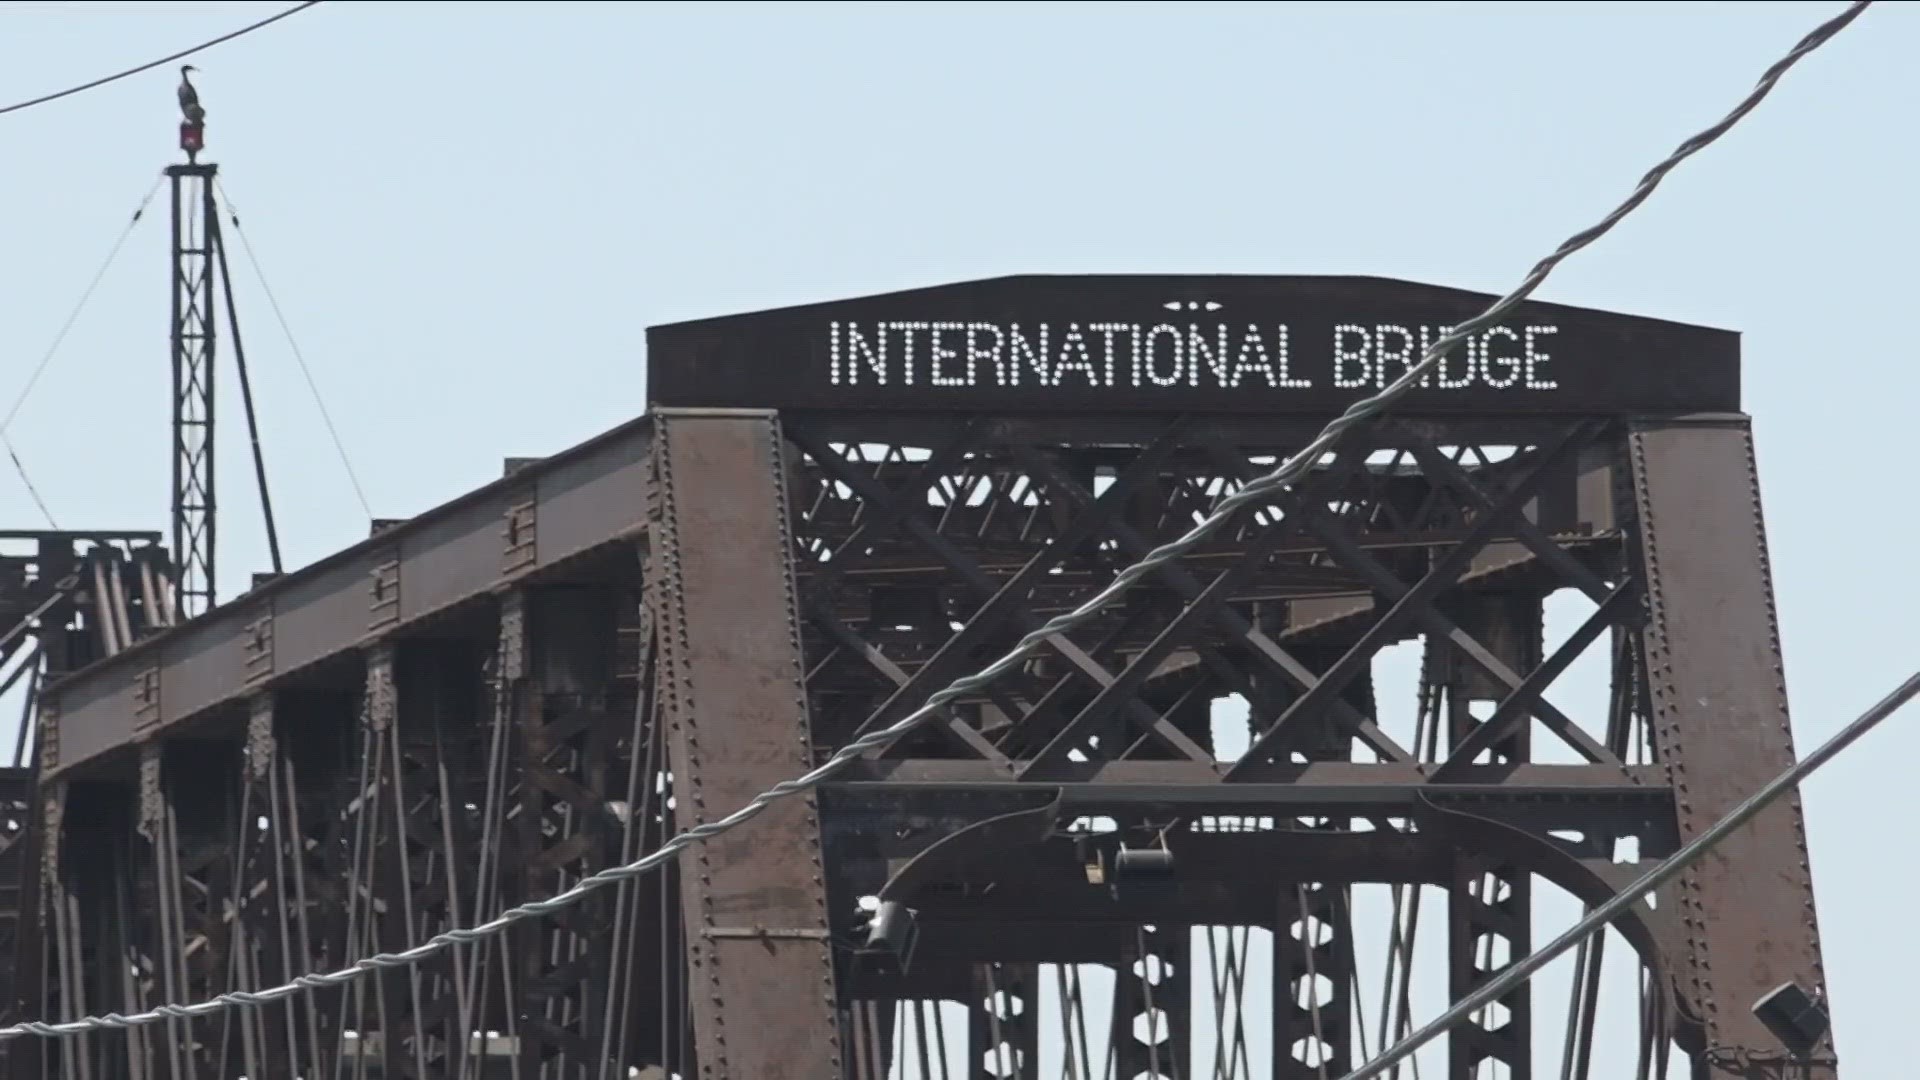 U.S. Customs and Border Protection say their agents spotted three people jumping off a freight train at the International Bridge.